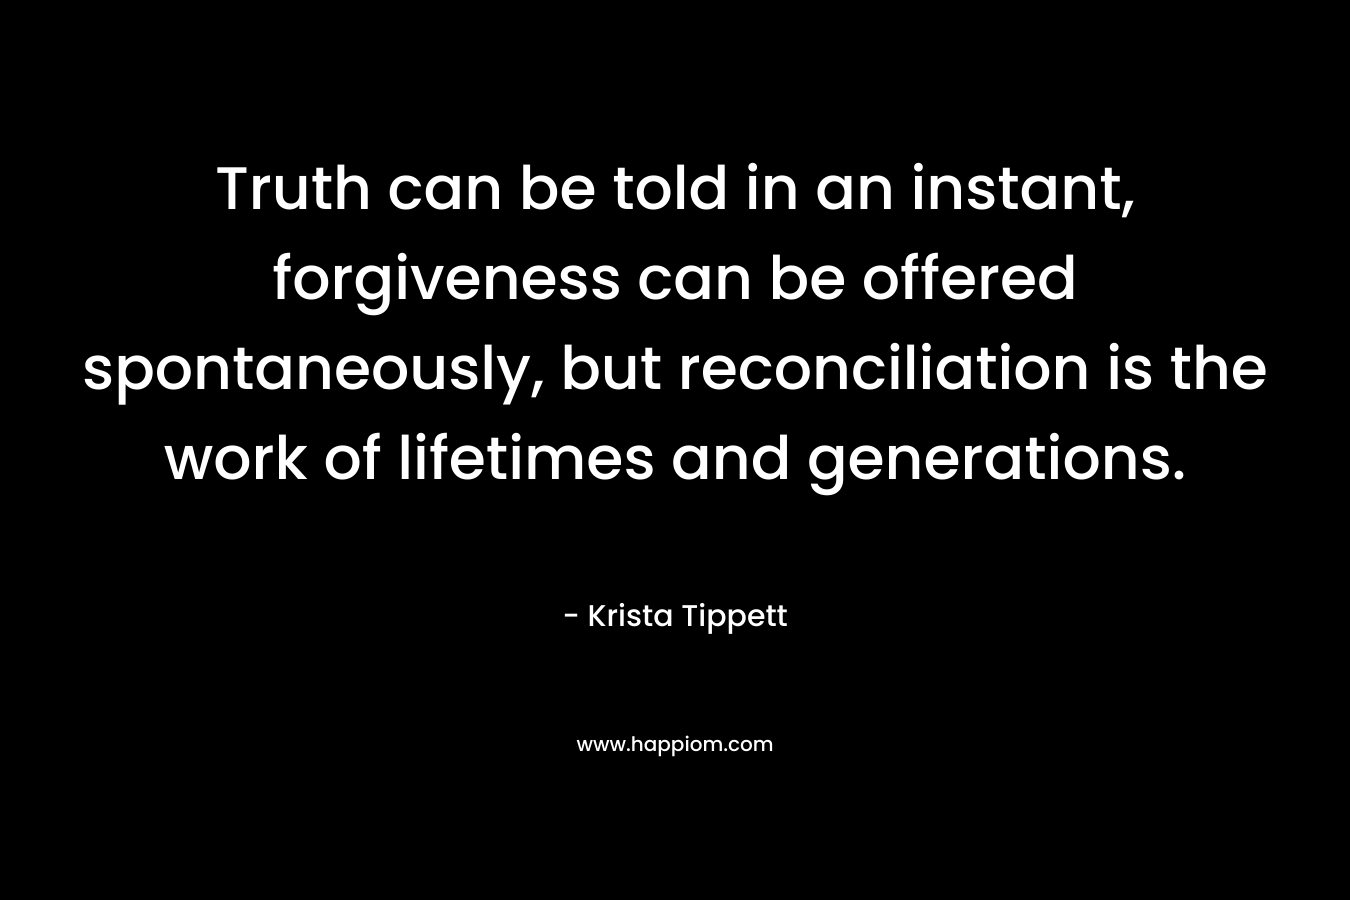 Truth can be told in an instant, forgiveness can be offered spontaneously, but reconciliation is the work of lifetimes and generations. – Krista Tippett